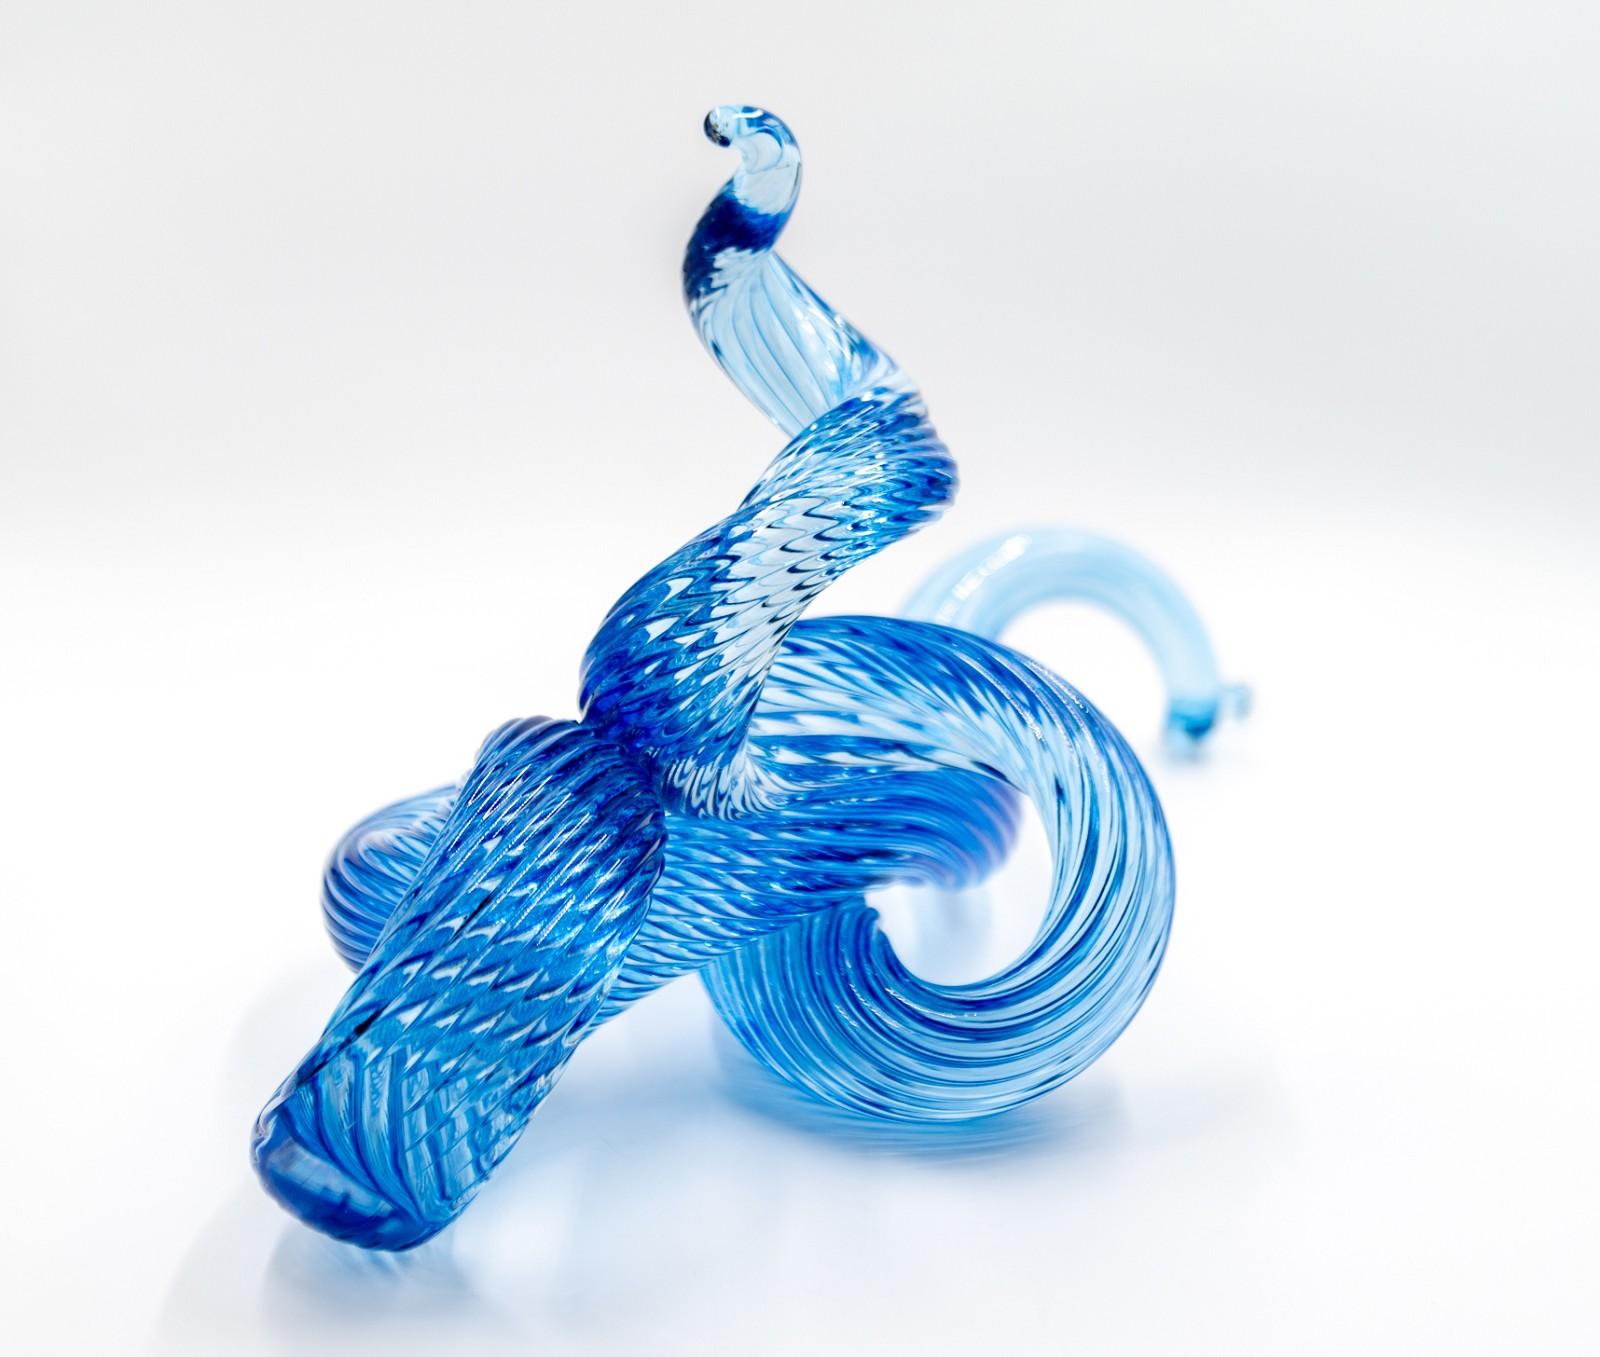 Surf Series H20 7 - translucent, blue, shaped solid glass, table top sculpture - Sculpture by John Paul Robinson